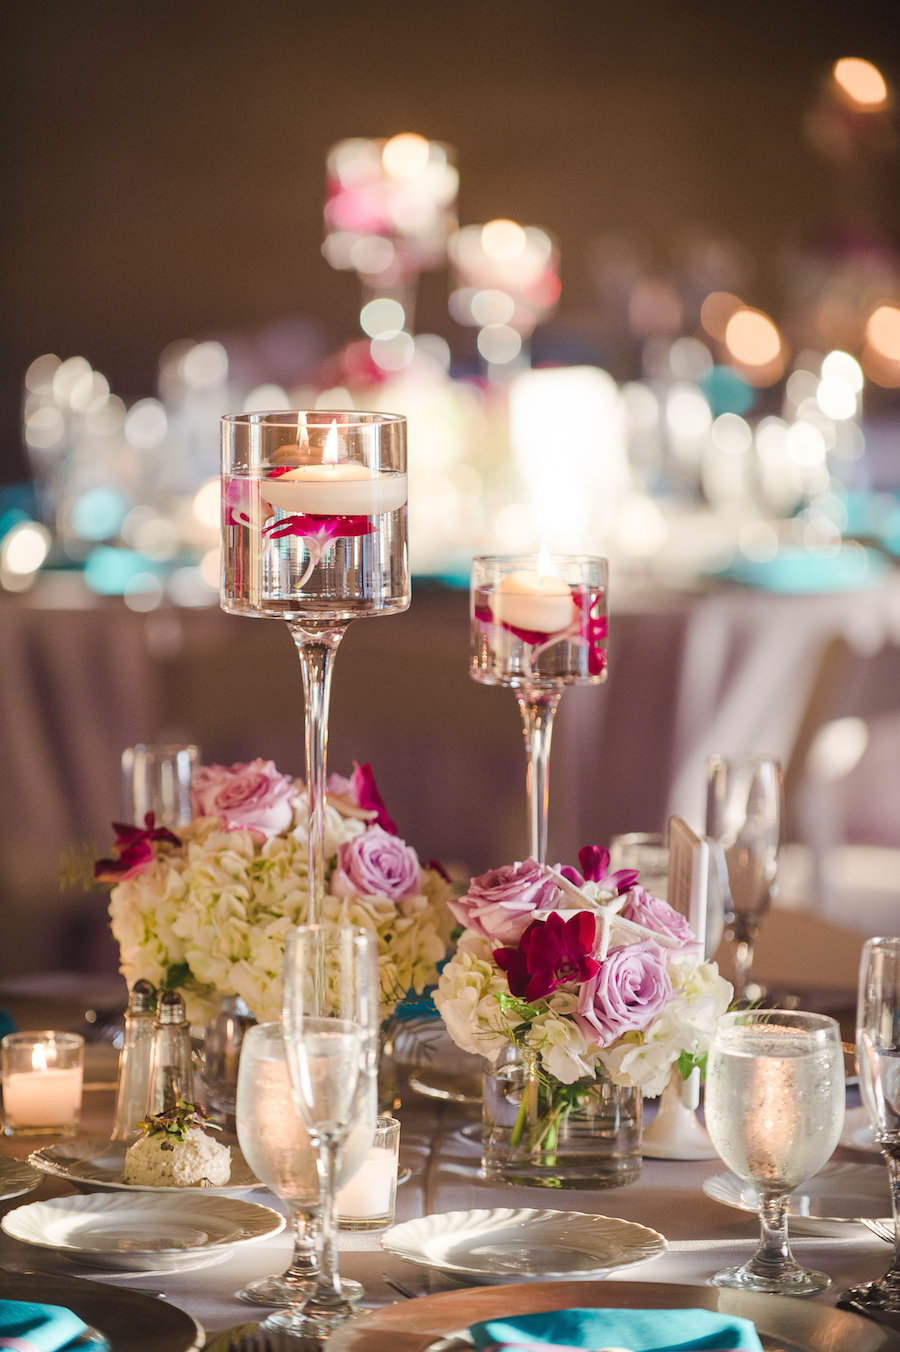 xWedding Reception with Fuchsia, Lavender, and Turquoise Centerpieces with Floating Tea Light Candles on Grey Silver Linens | Sarasota Wedding Planner UNIQUE Weddings and Events | Linens Rentals by Connie Duglin